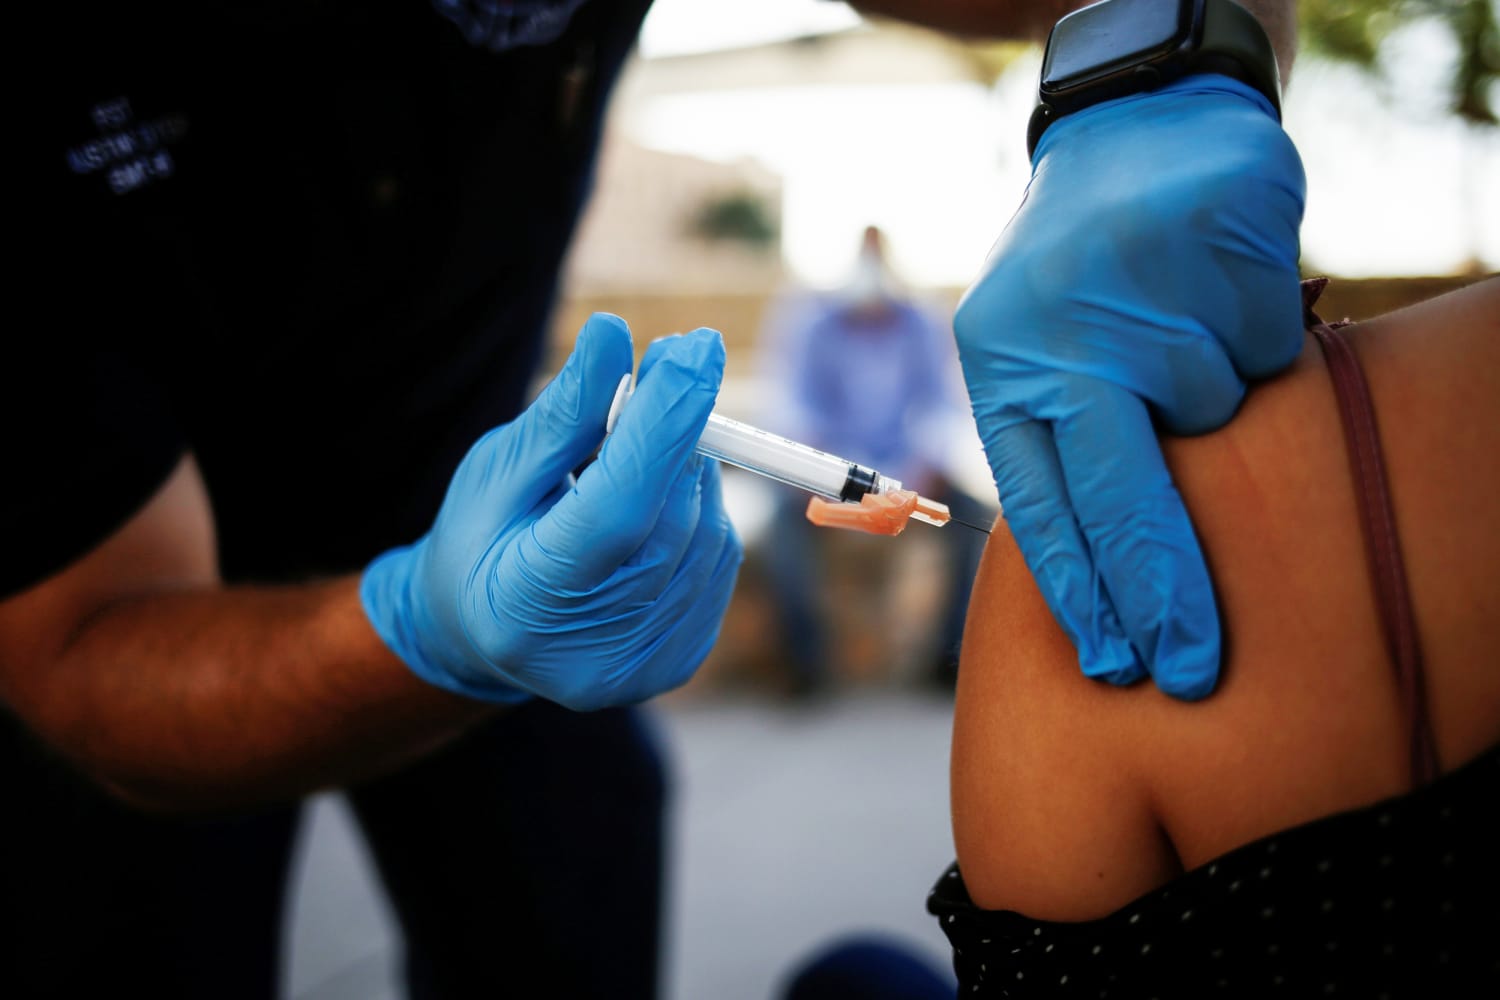 Covid shot tourism: Latin Americans are traveling to the U.S. for vaccines